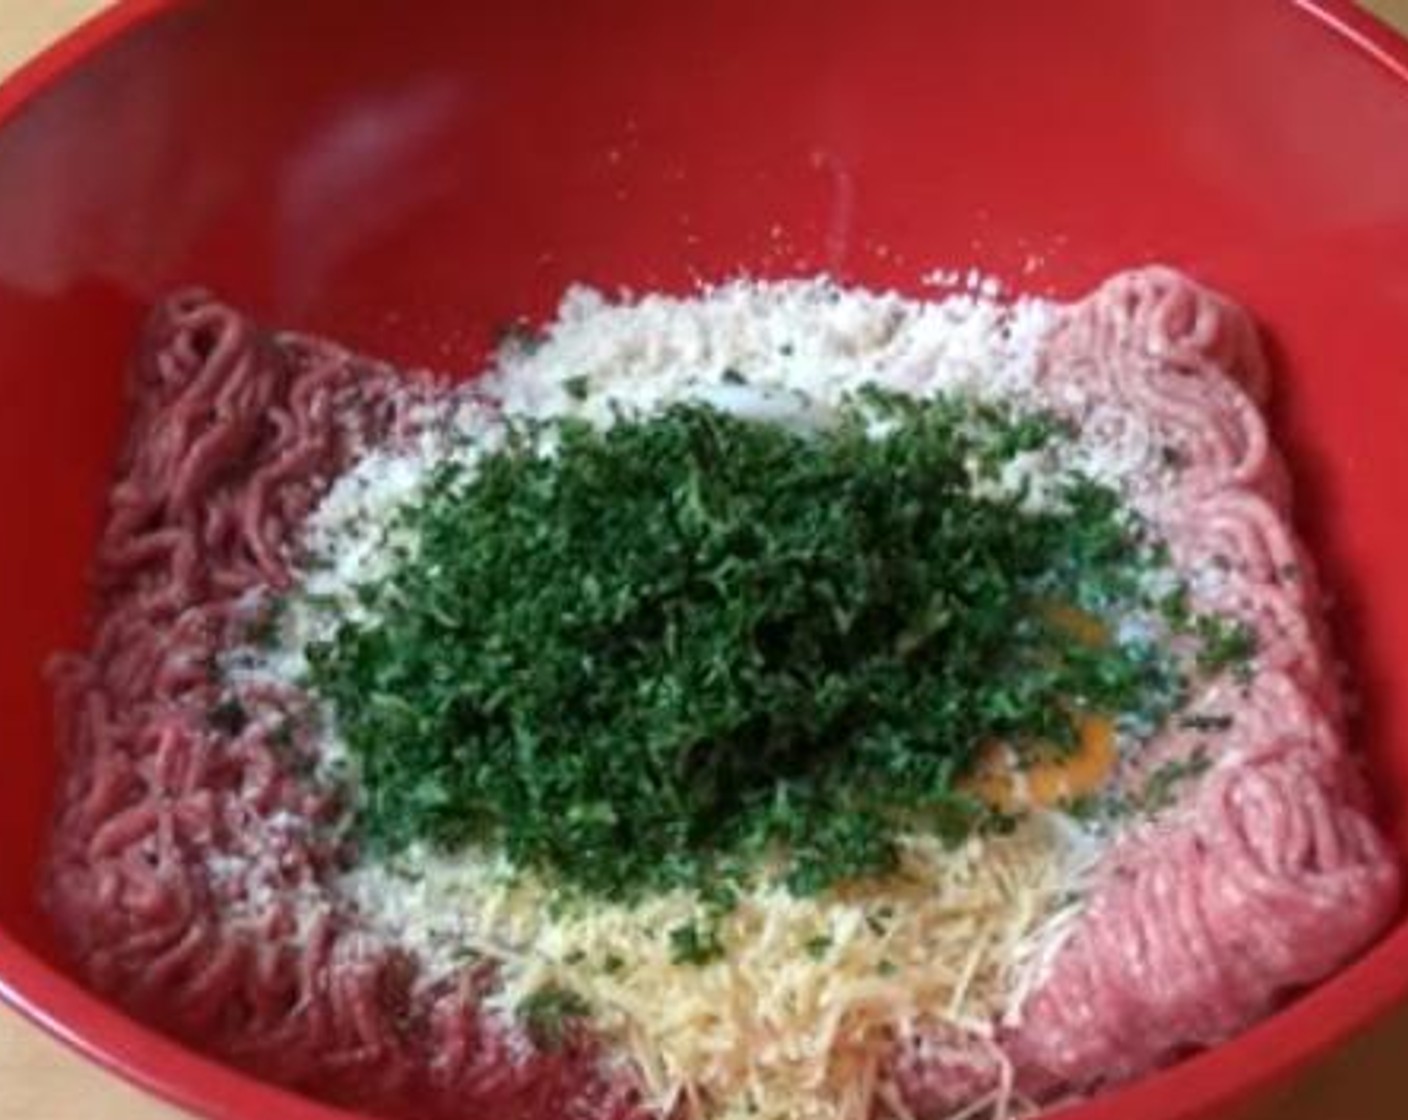 step 1 Into a mixing bowl, add in the Ground Beef (1.1 lb), Pork (1.1 lb), McCormick® Garlic Powder (1 tsp), Breadcrumbs (1 cup), Parmesan Cheese (1/4 cup), Eggs (2), Milk (1/2 cup), Fresh Parsley (1/2 cup), Salt (to taste), and Ground Black Pepper (to taste). Using your hands mix everything together.